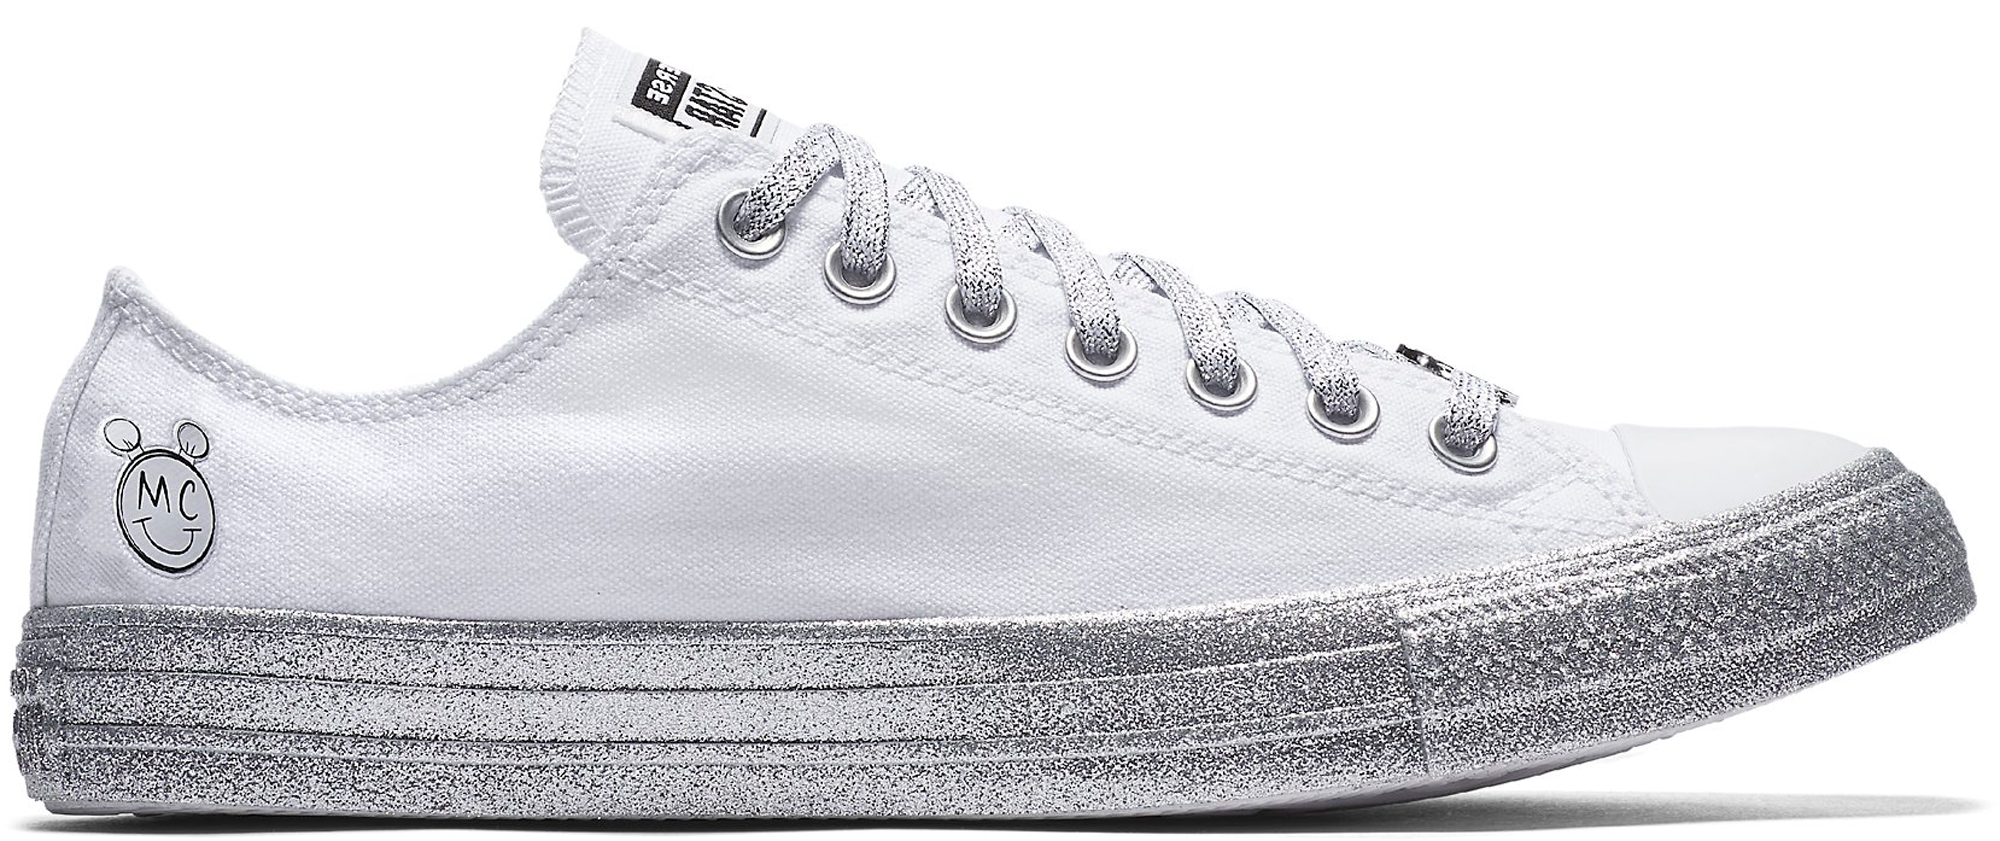 All-Star Low Miley Cyrus White Silver 